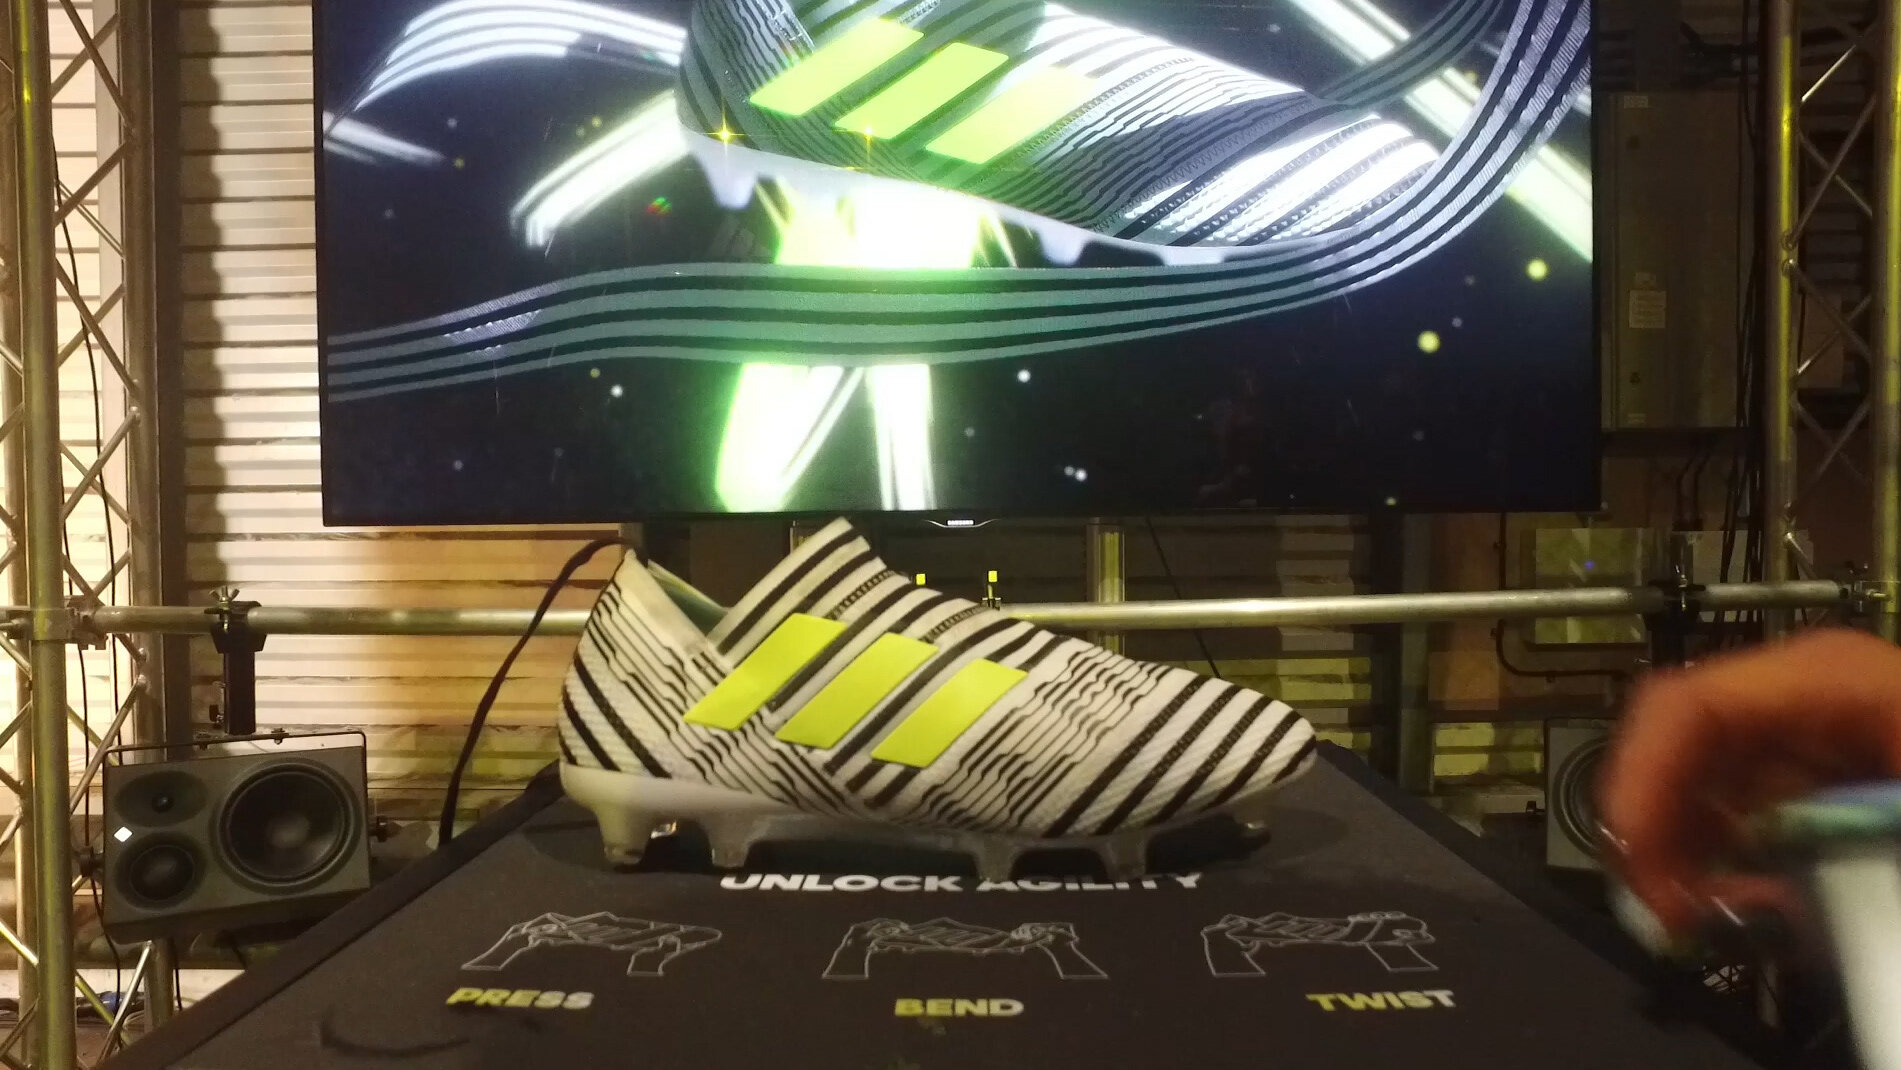 ADIDAS NEMEZIZ Football Boot Launch - A fully interactive and Responsive Sound Environment with